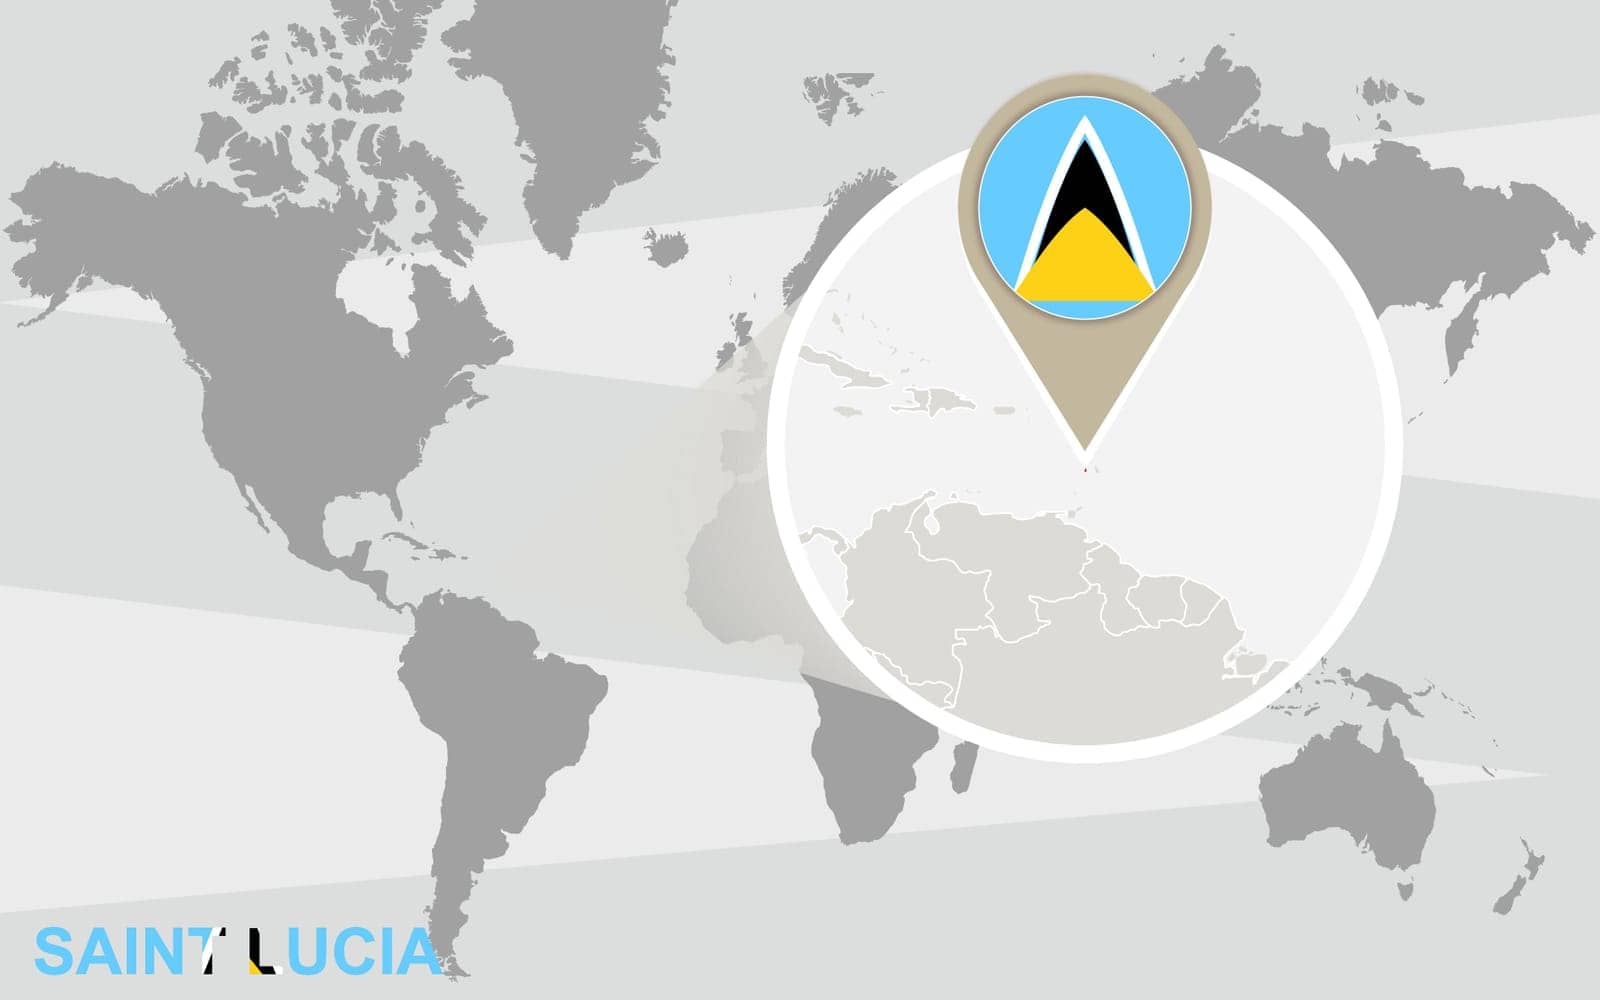 World map with magnified Saint Lucia. Saint Lucia flag and map.